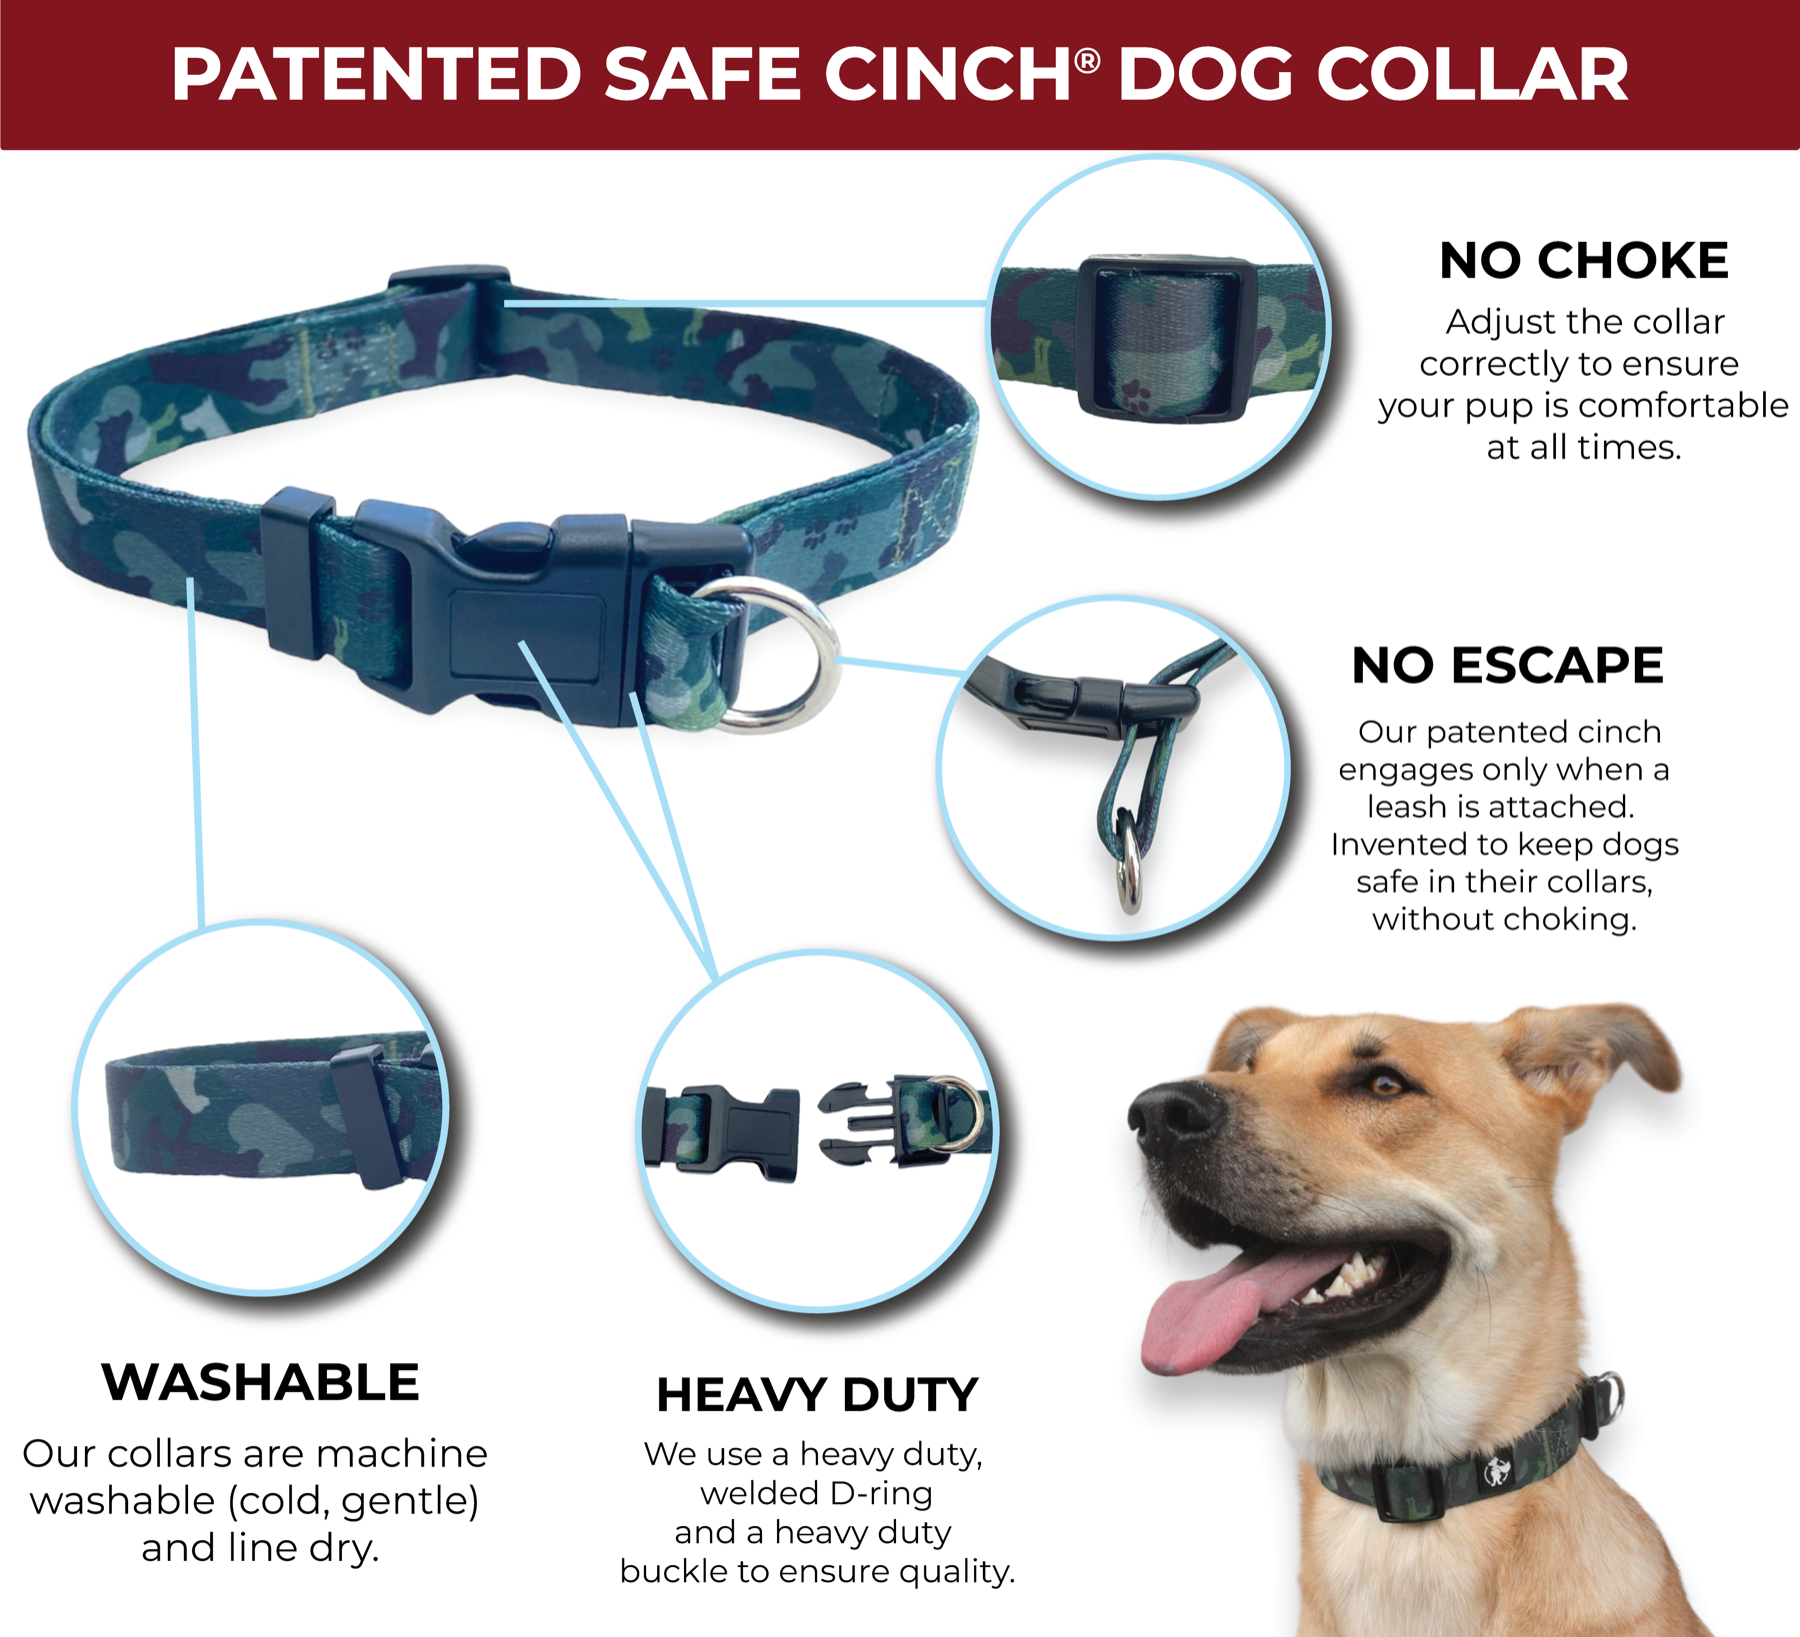 An infographic showing the no choke no escape dog collar features of a safe cinch collar on white background. There are bubbles showing the adjustable and other features of the collar